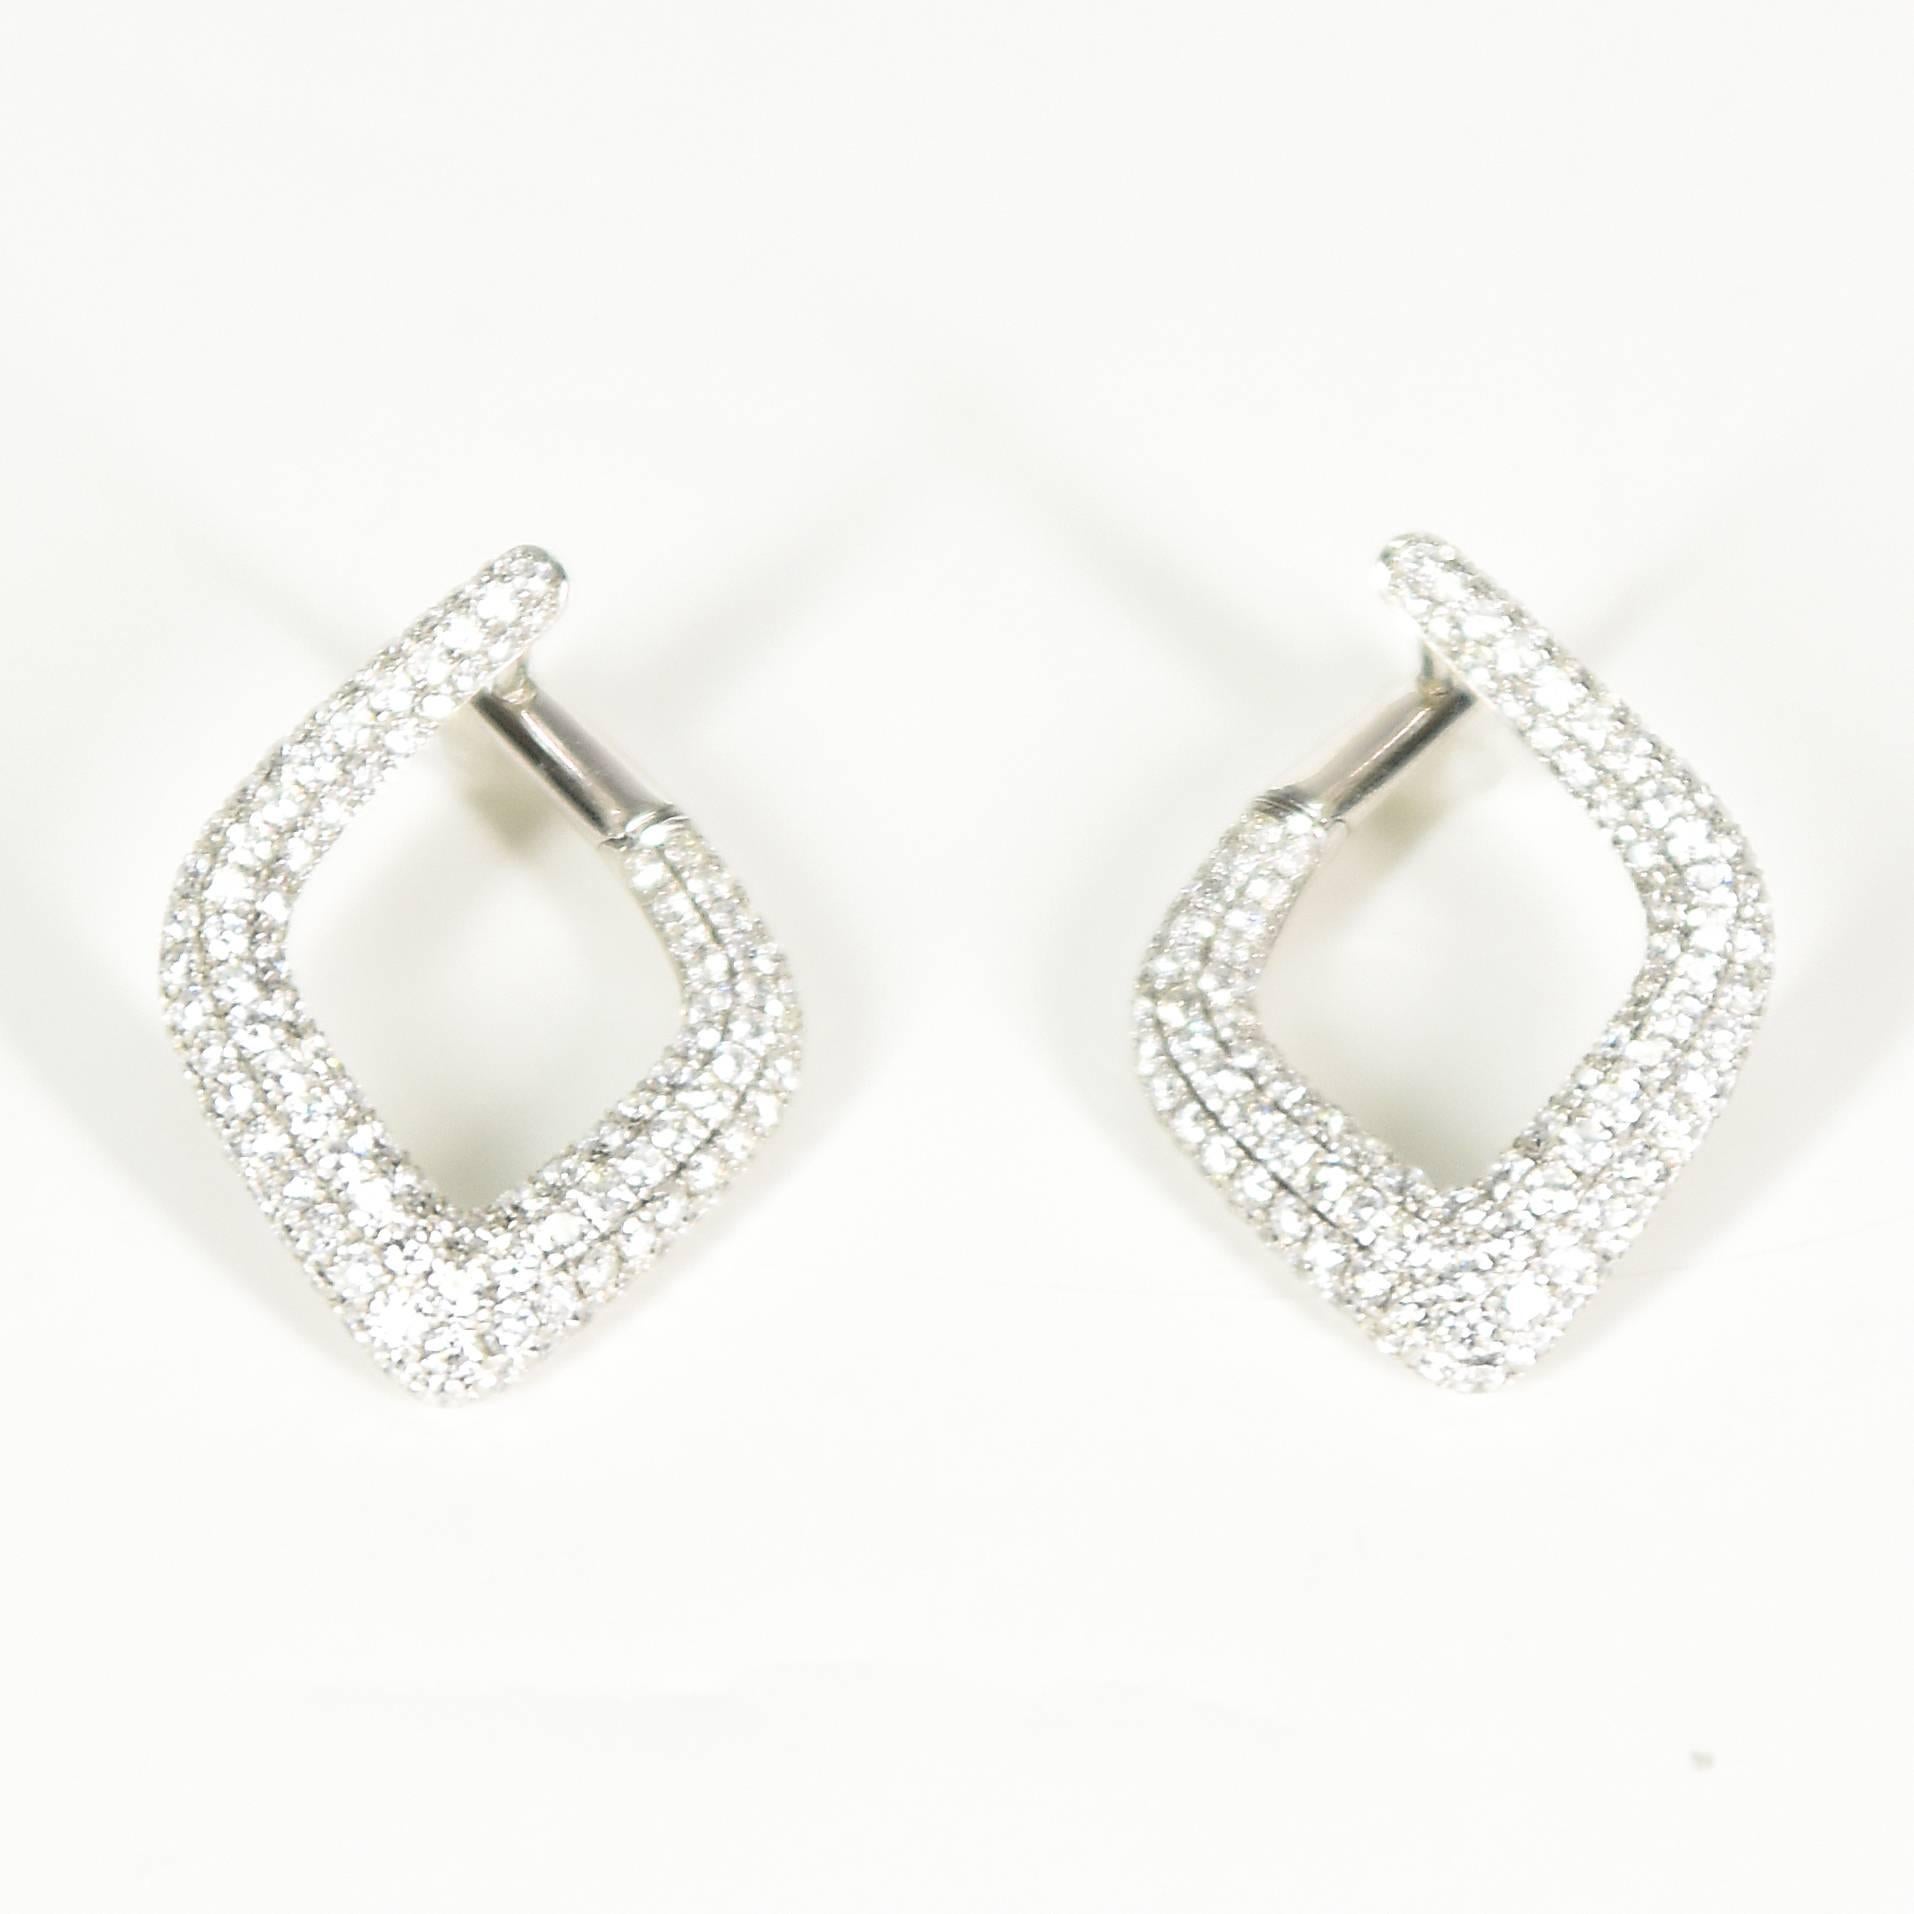 A pair of Modernist 18ct white gold, diamond-set, open-centred rhomb shaped hoop earrings. Each earring is micro-claw set with 135 brilliant cut diamonds, all totalling 3.35ct. Enclosed to the back by decoratively pierced under rails. 
Calculated